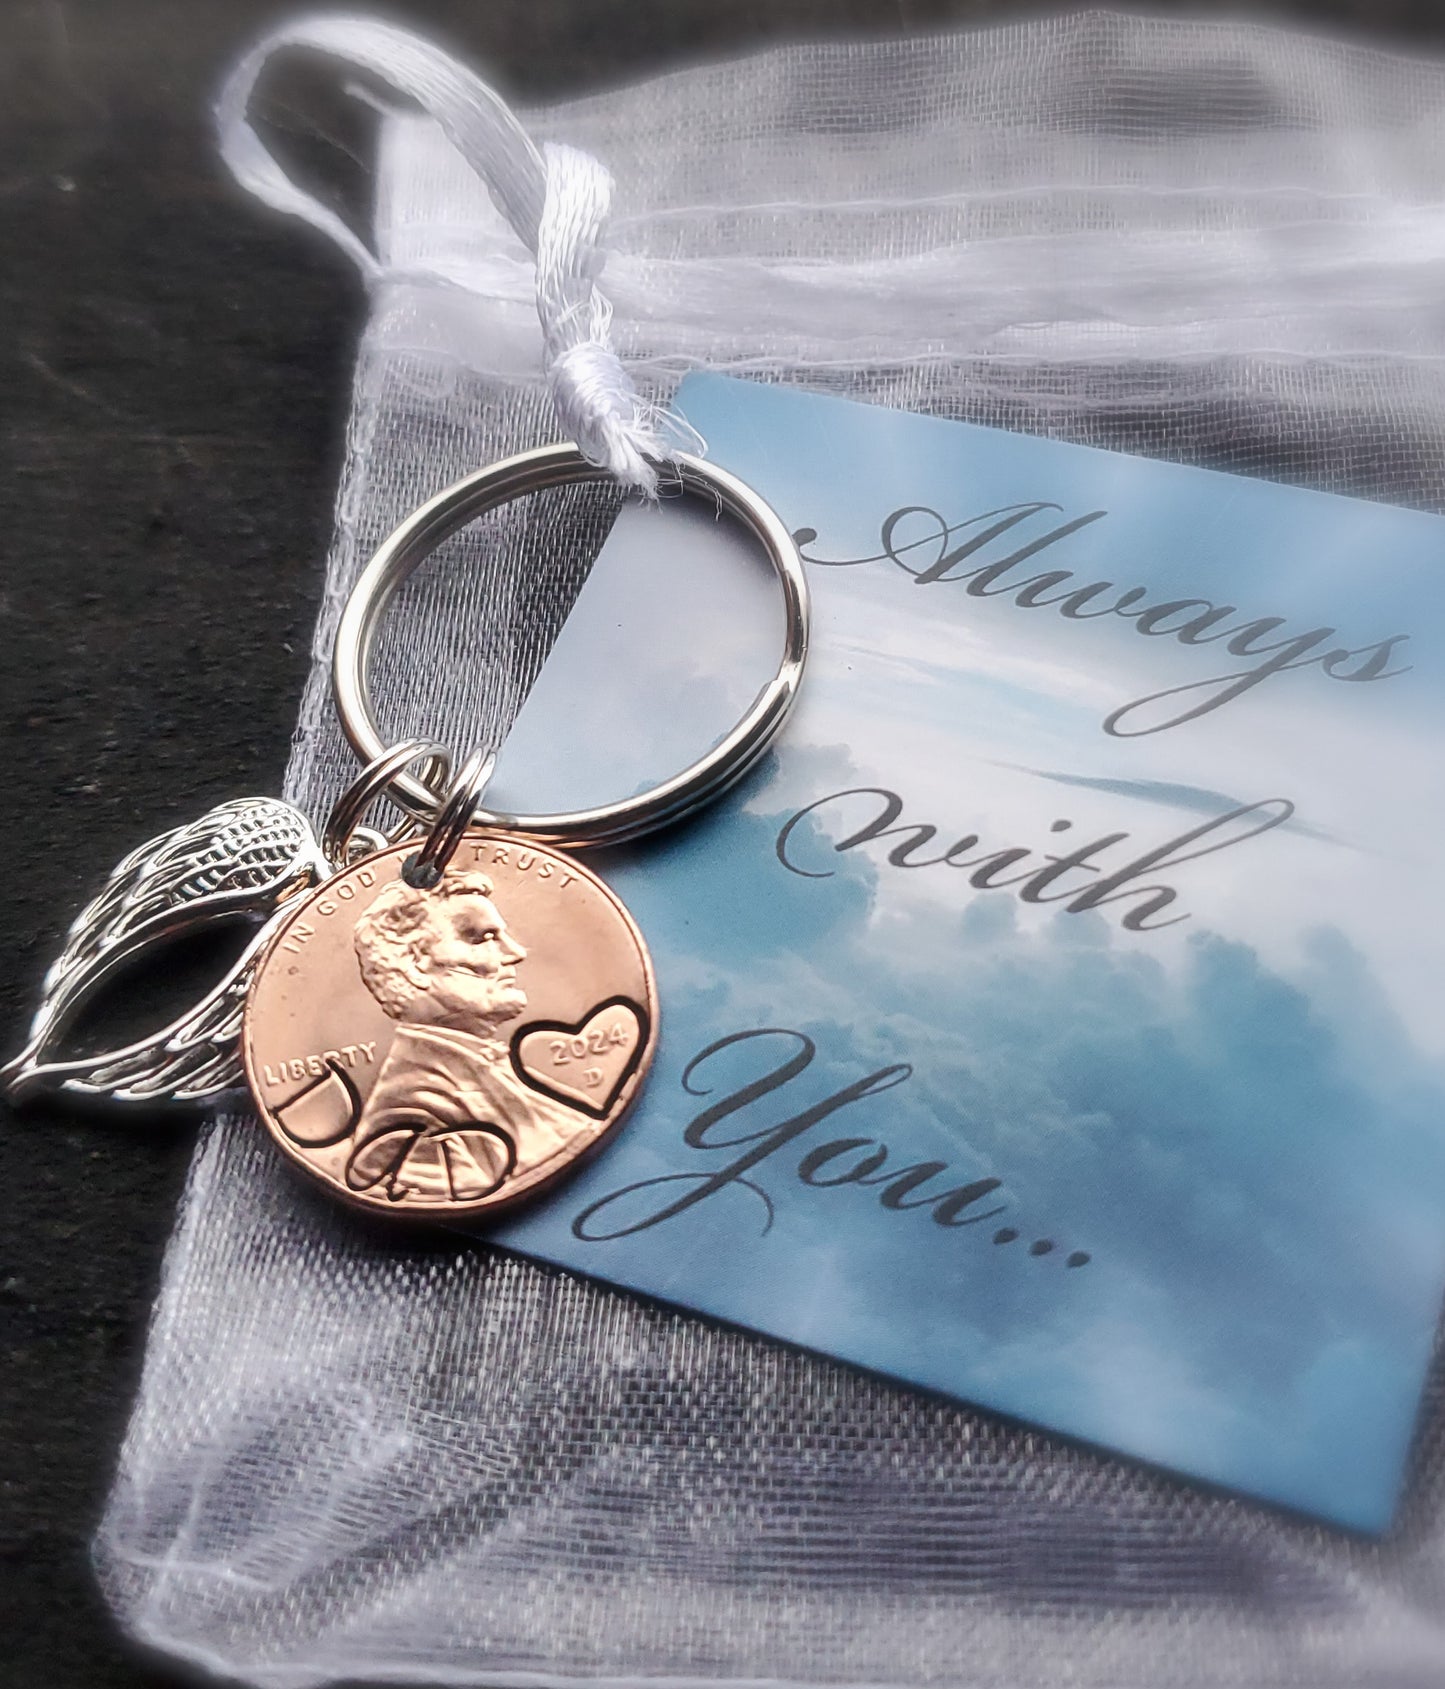 Penny from Heaven Memorial Keychain Gift, Sympathy Gift, Keepsake Memorial,  Personalized Custom Gift for Loss of Loved One, Comes with angel wing Charm